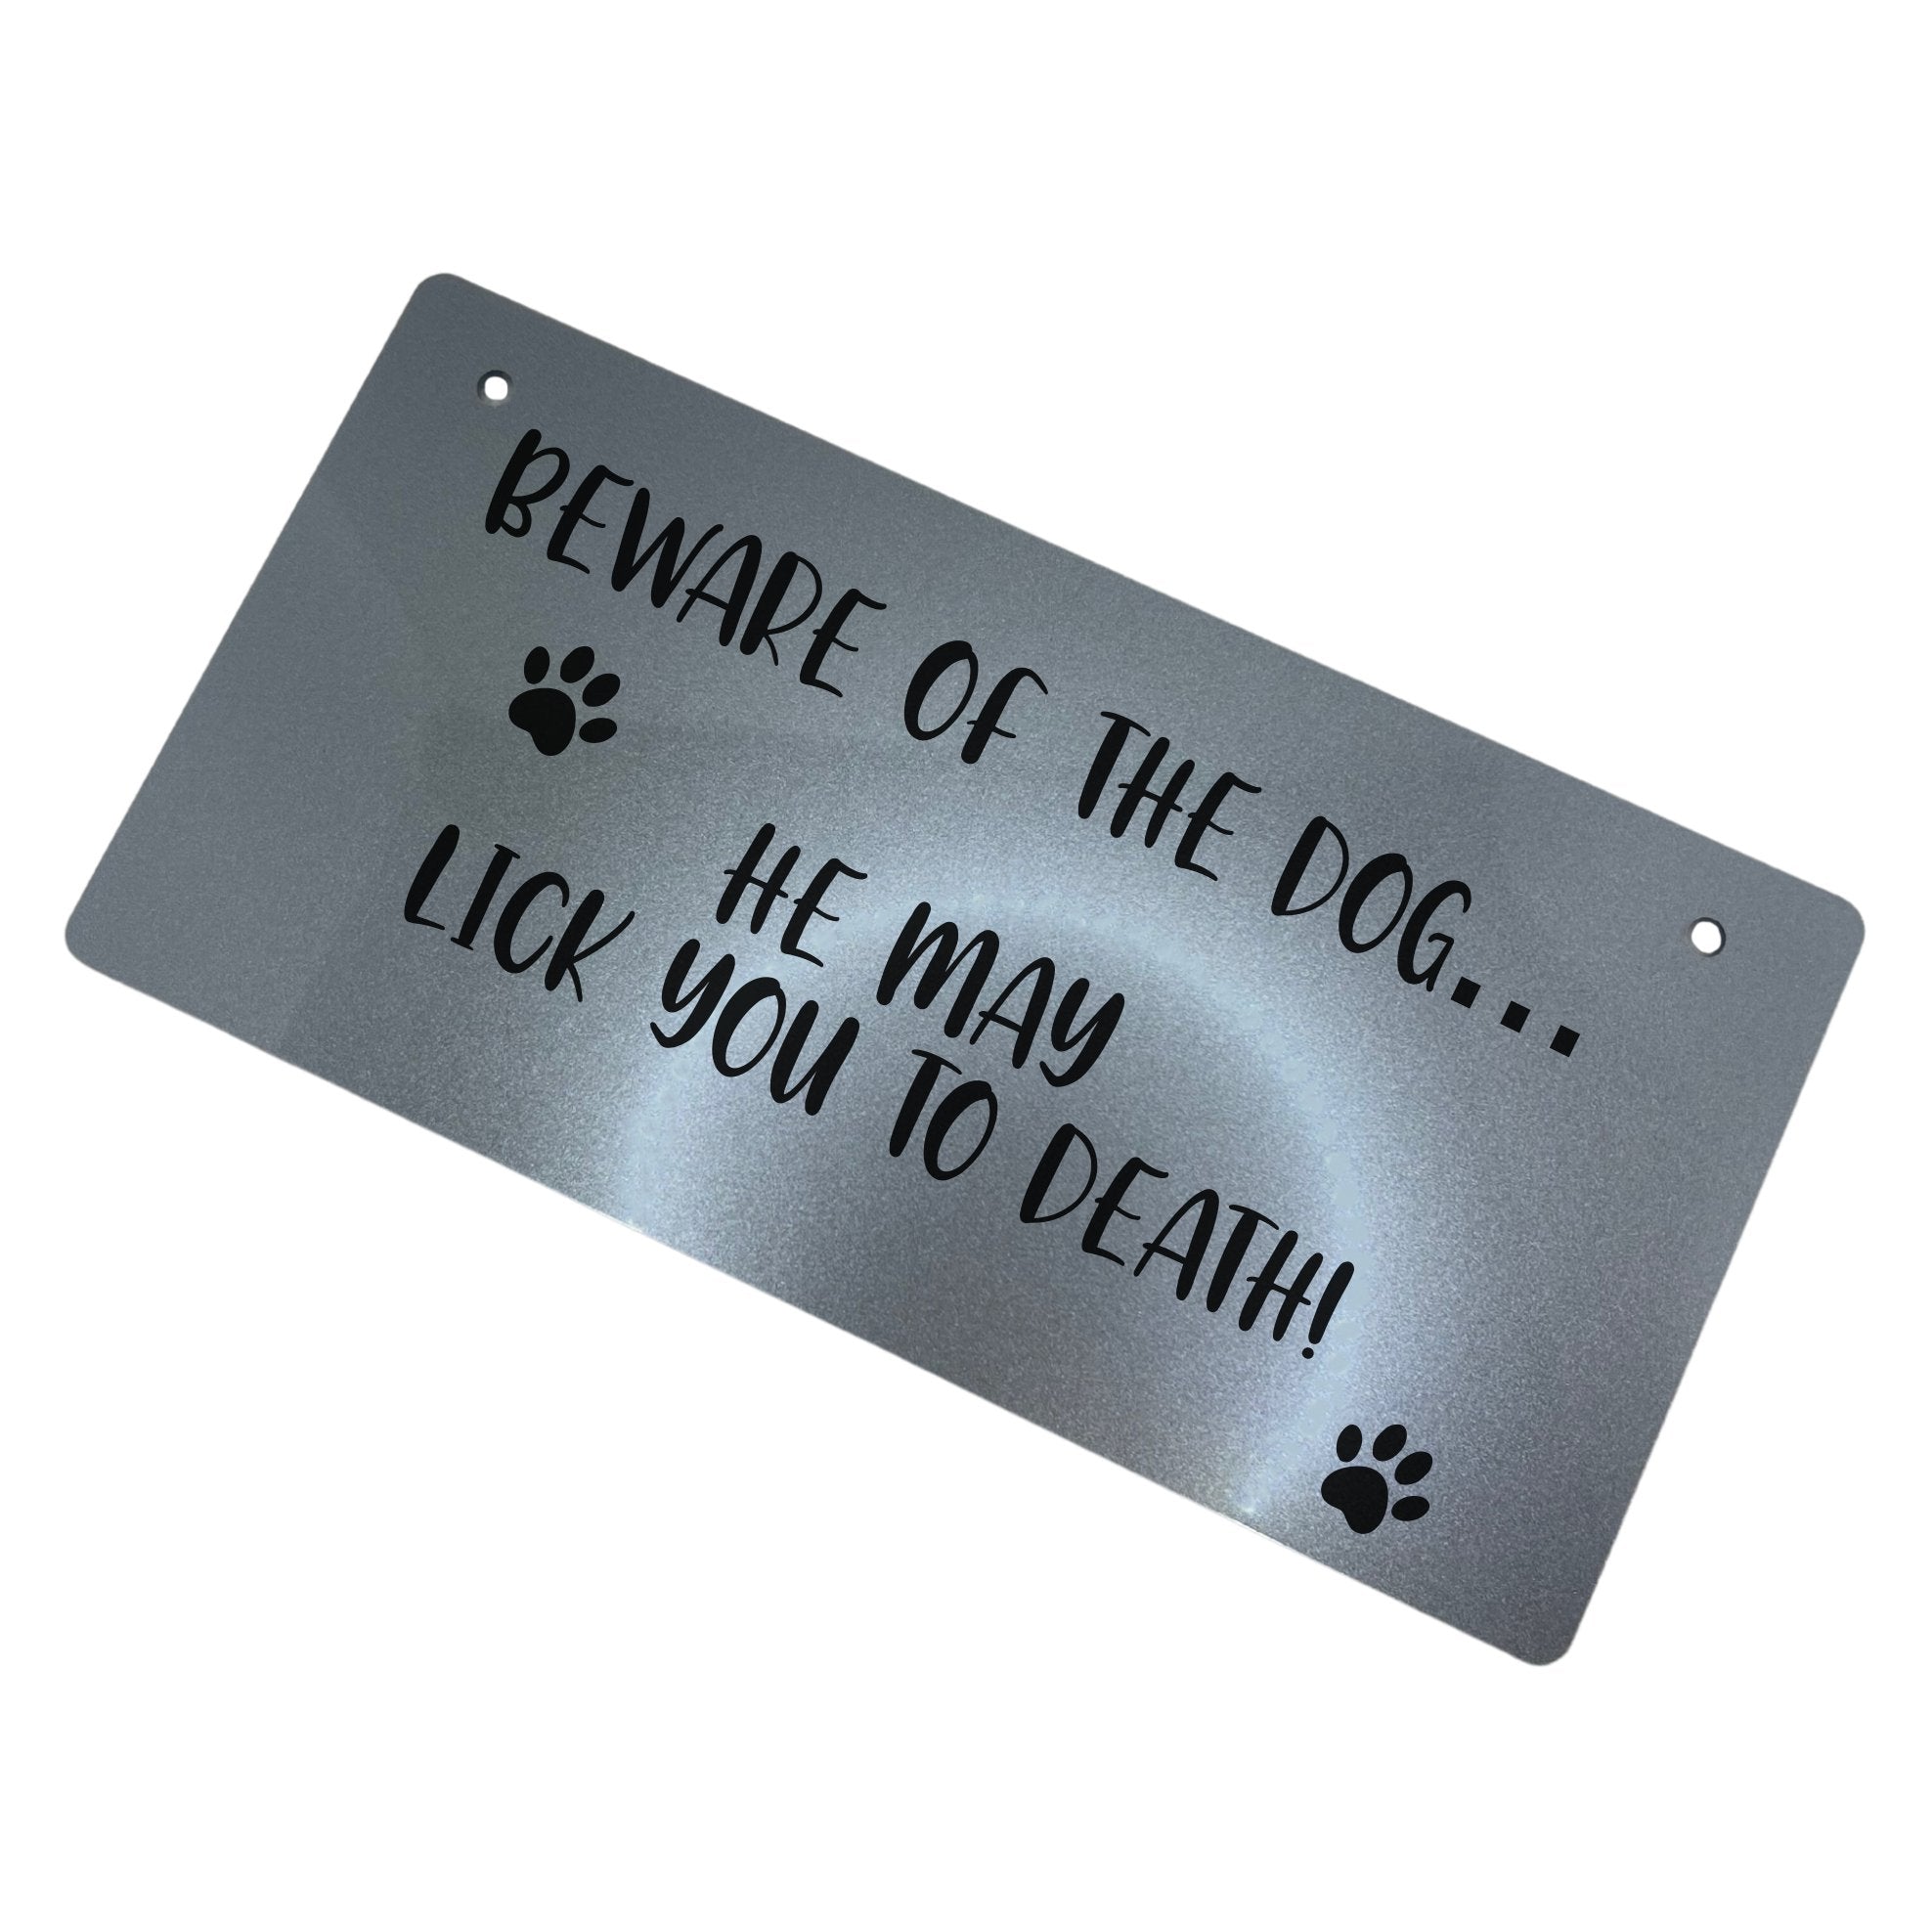 Capturing attention with its laser-engraved inscription, 'Beware Of The Dog - He May Lick You To Death', this acrylic sign stands as a testament to its durability. Presented in elegant gold or silver, it infuses humor into any setting, leaving a lasting impression on all who come across it.